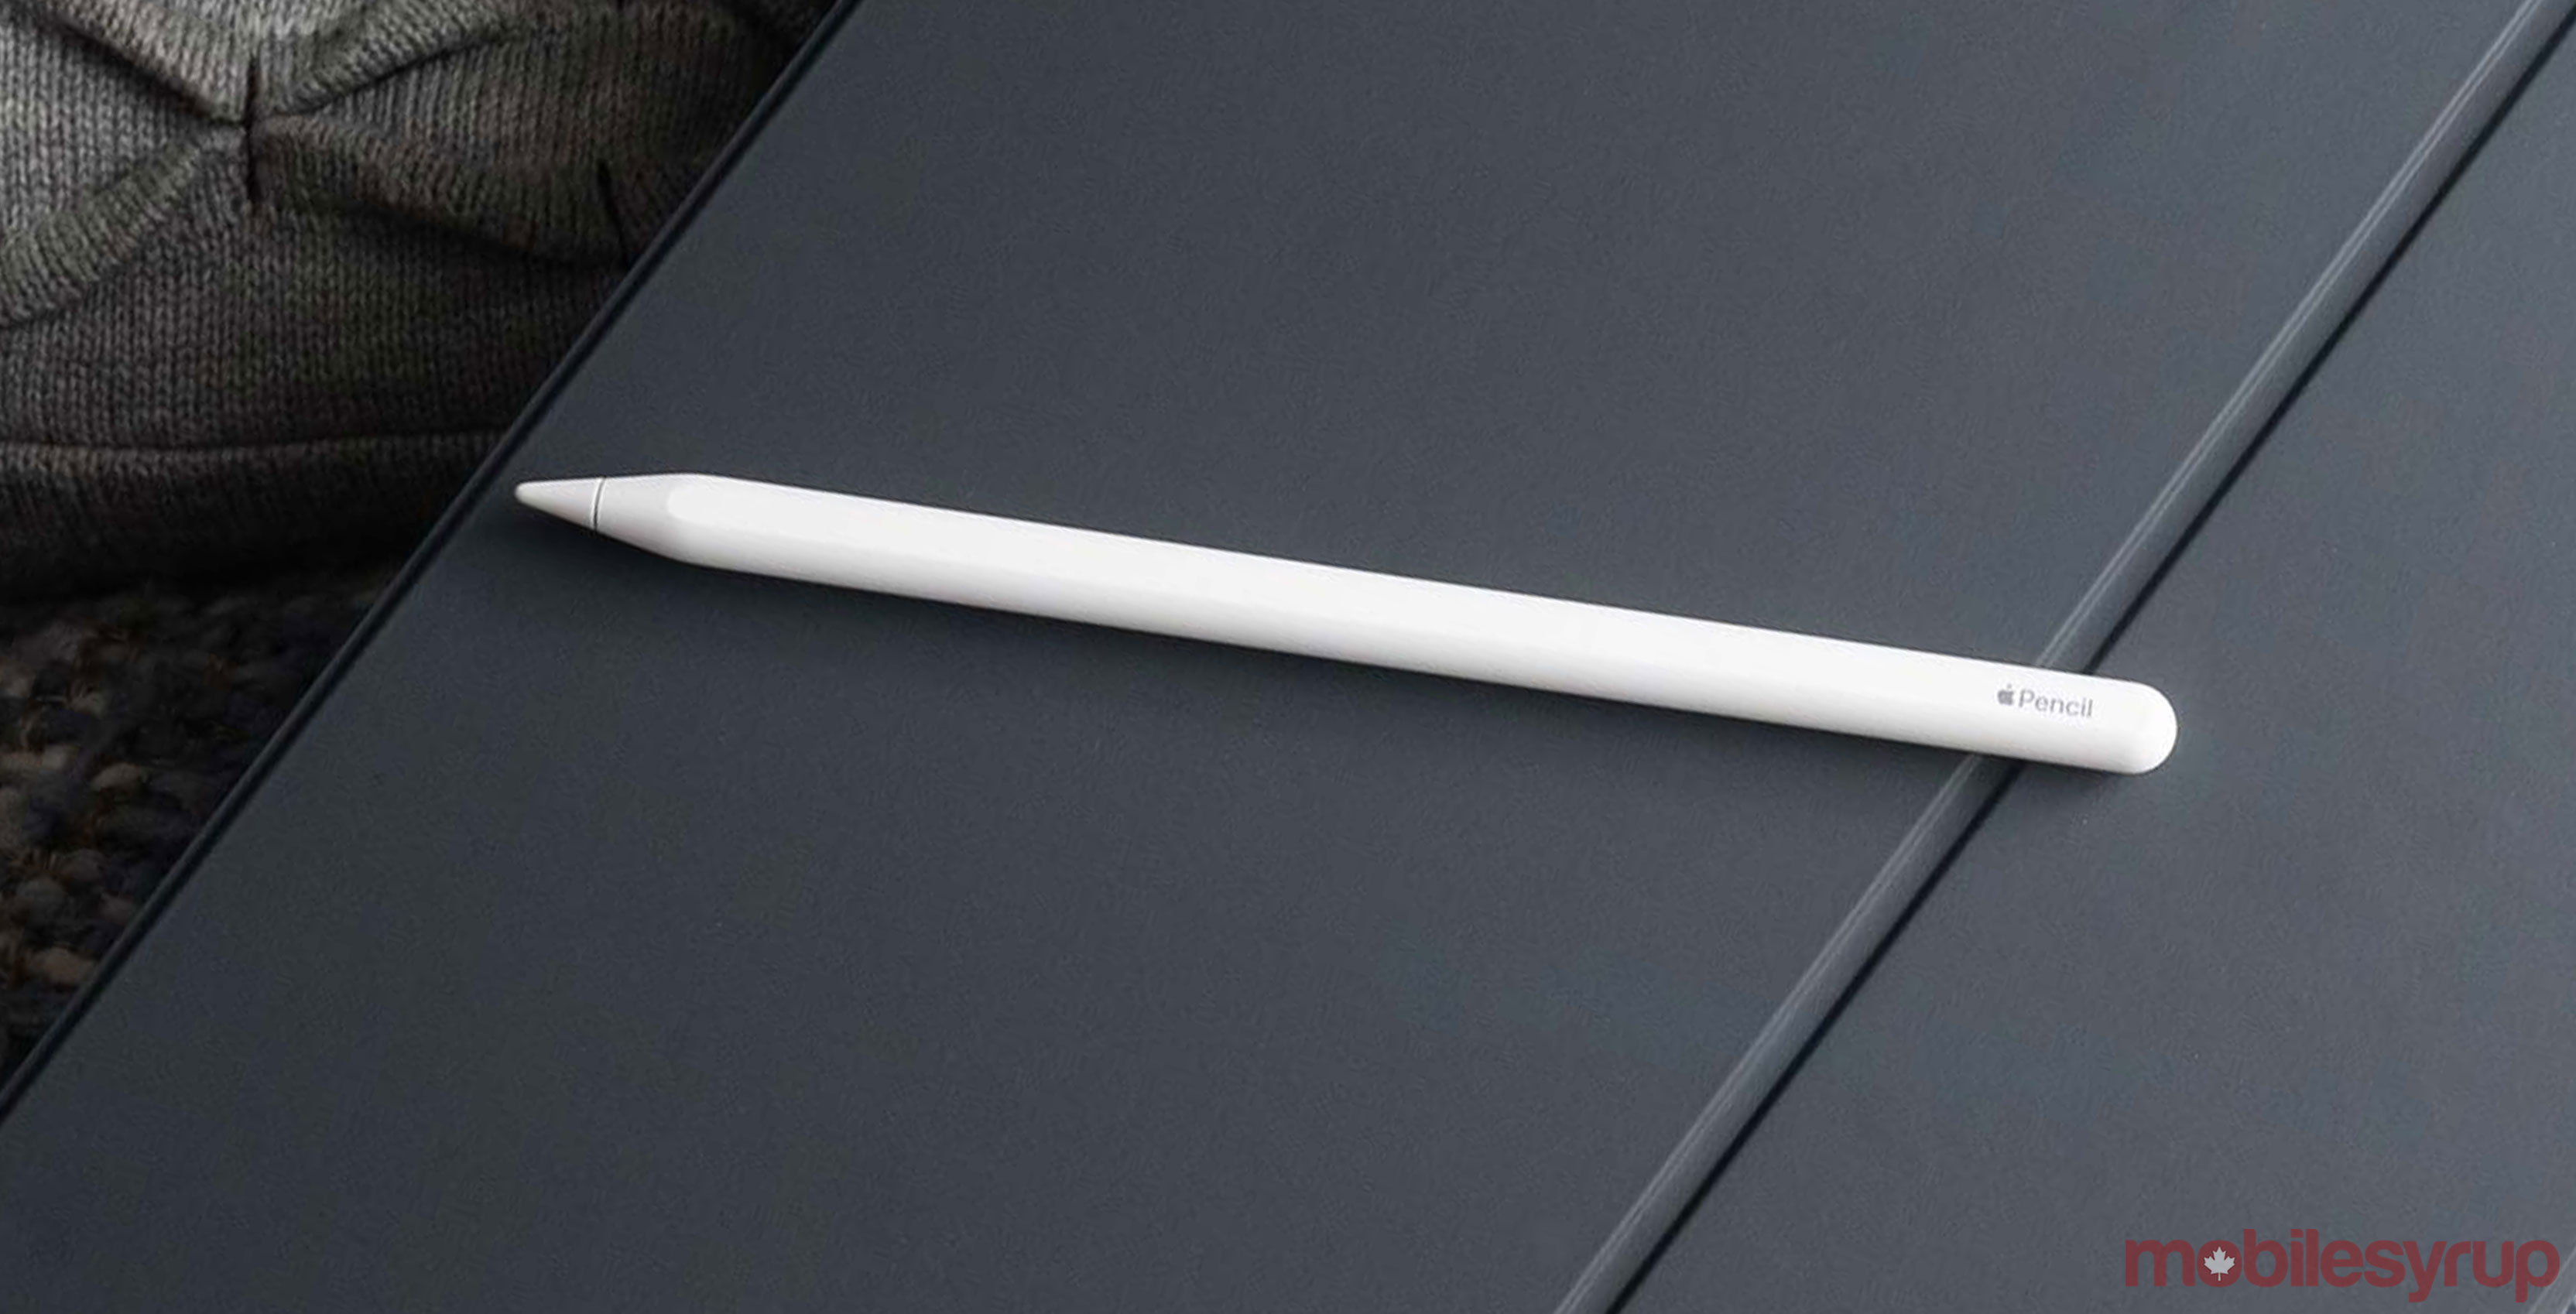 iFixit teardown suggests Apple Pencil could become more useful over time